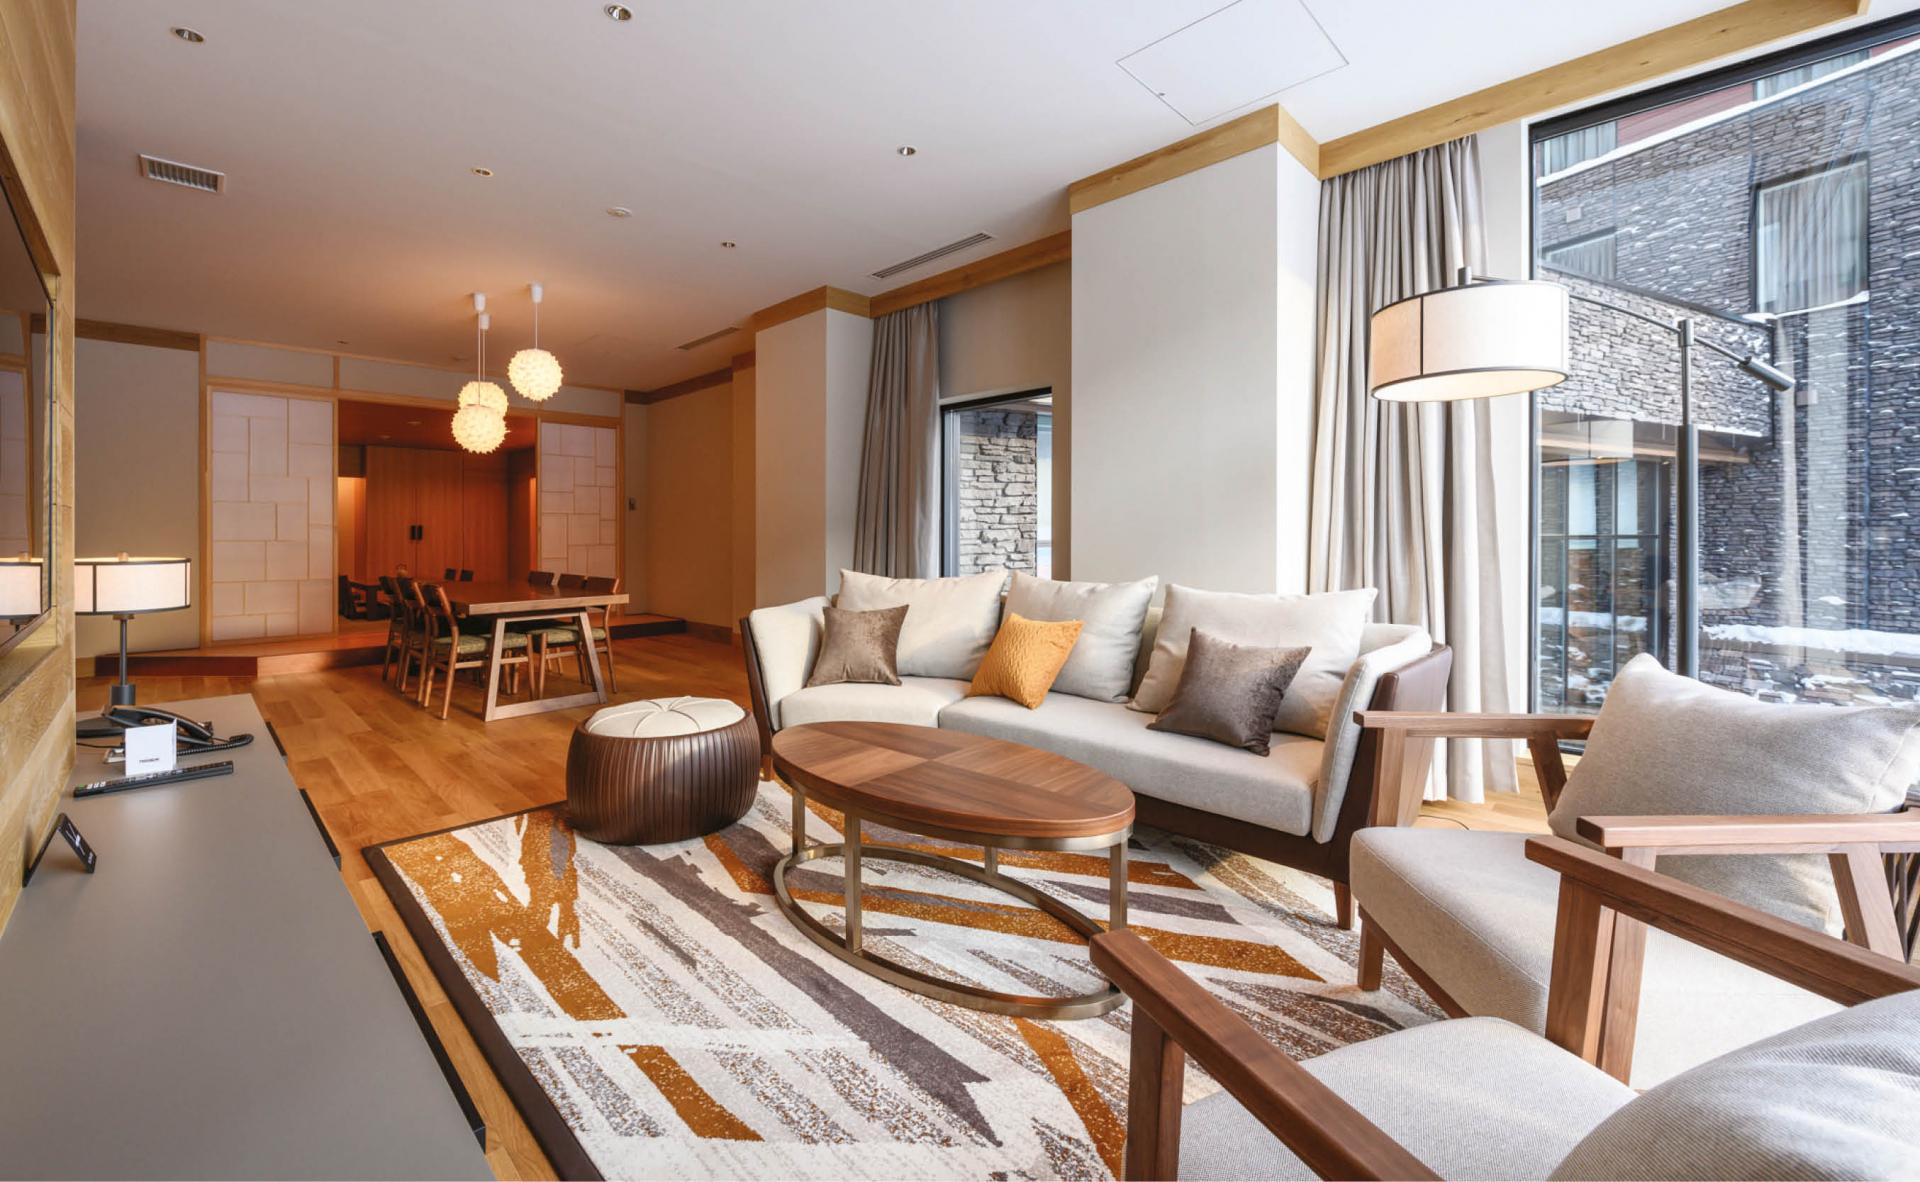 Feel the Snow at this World-Class Alpine Destination with Luxurious Homes in Japan